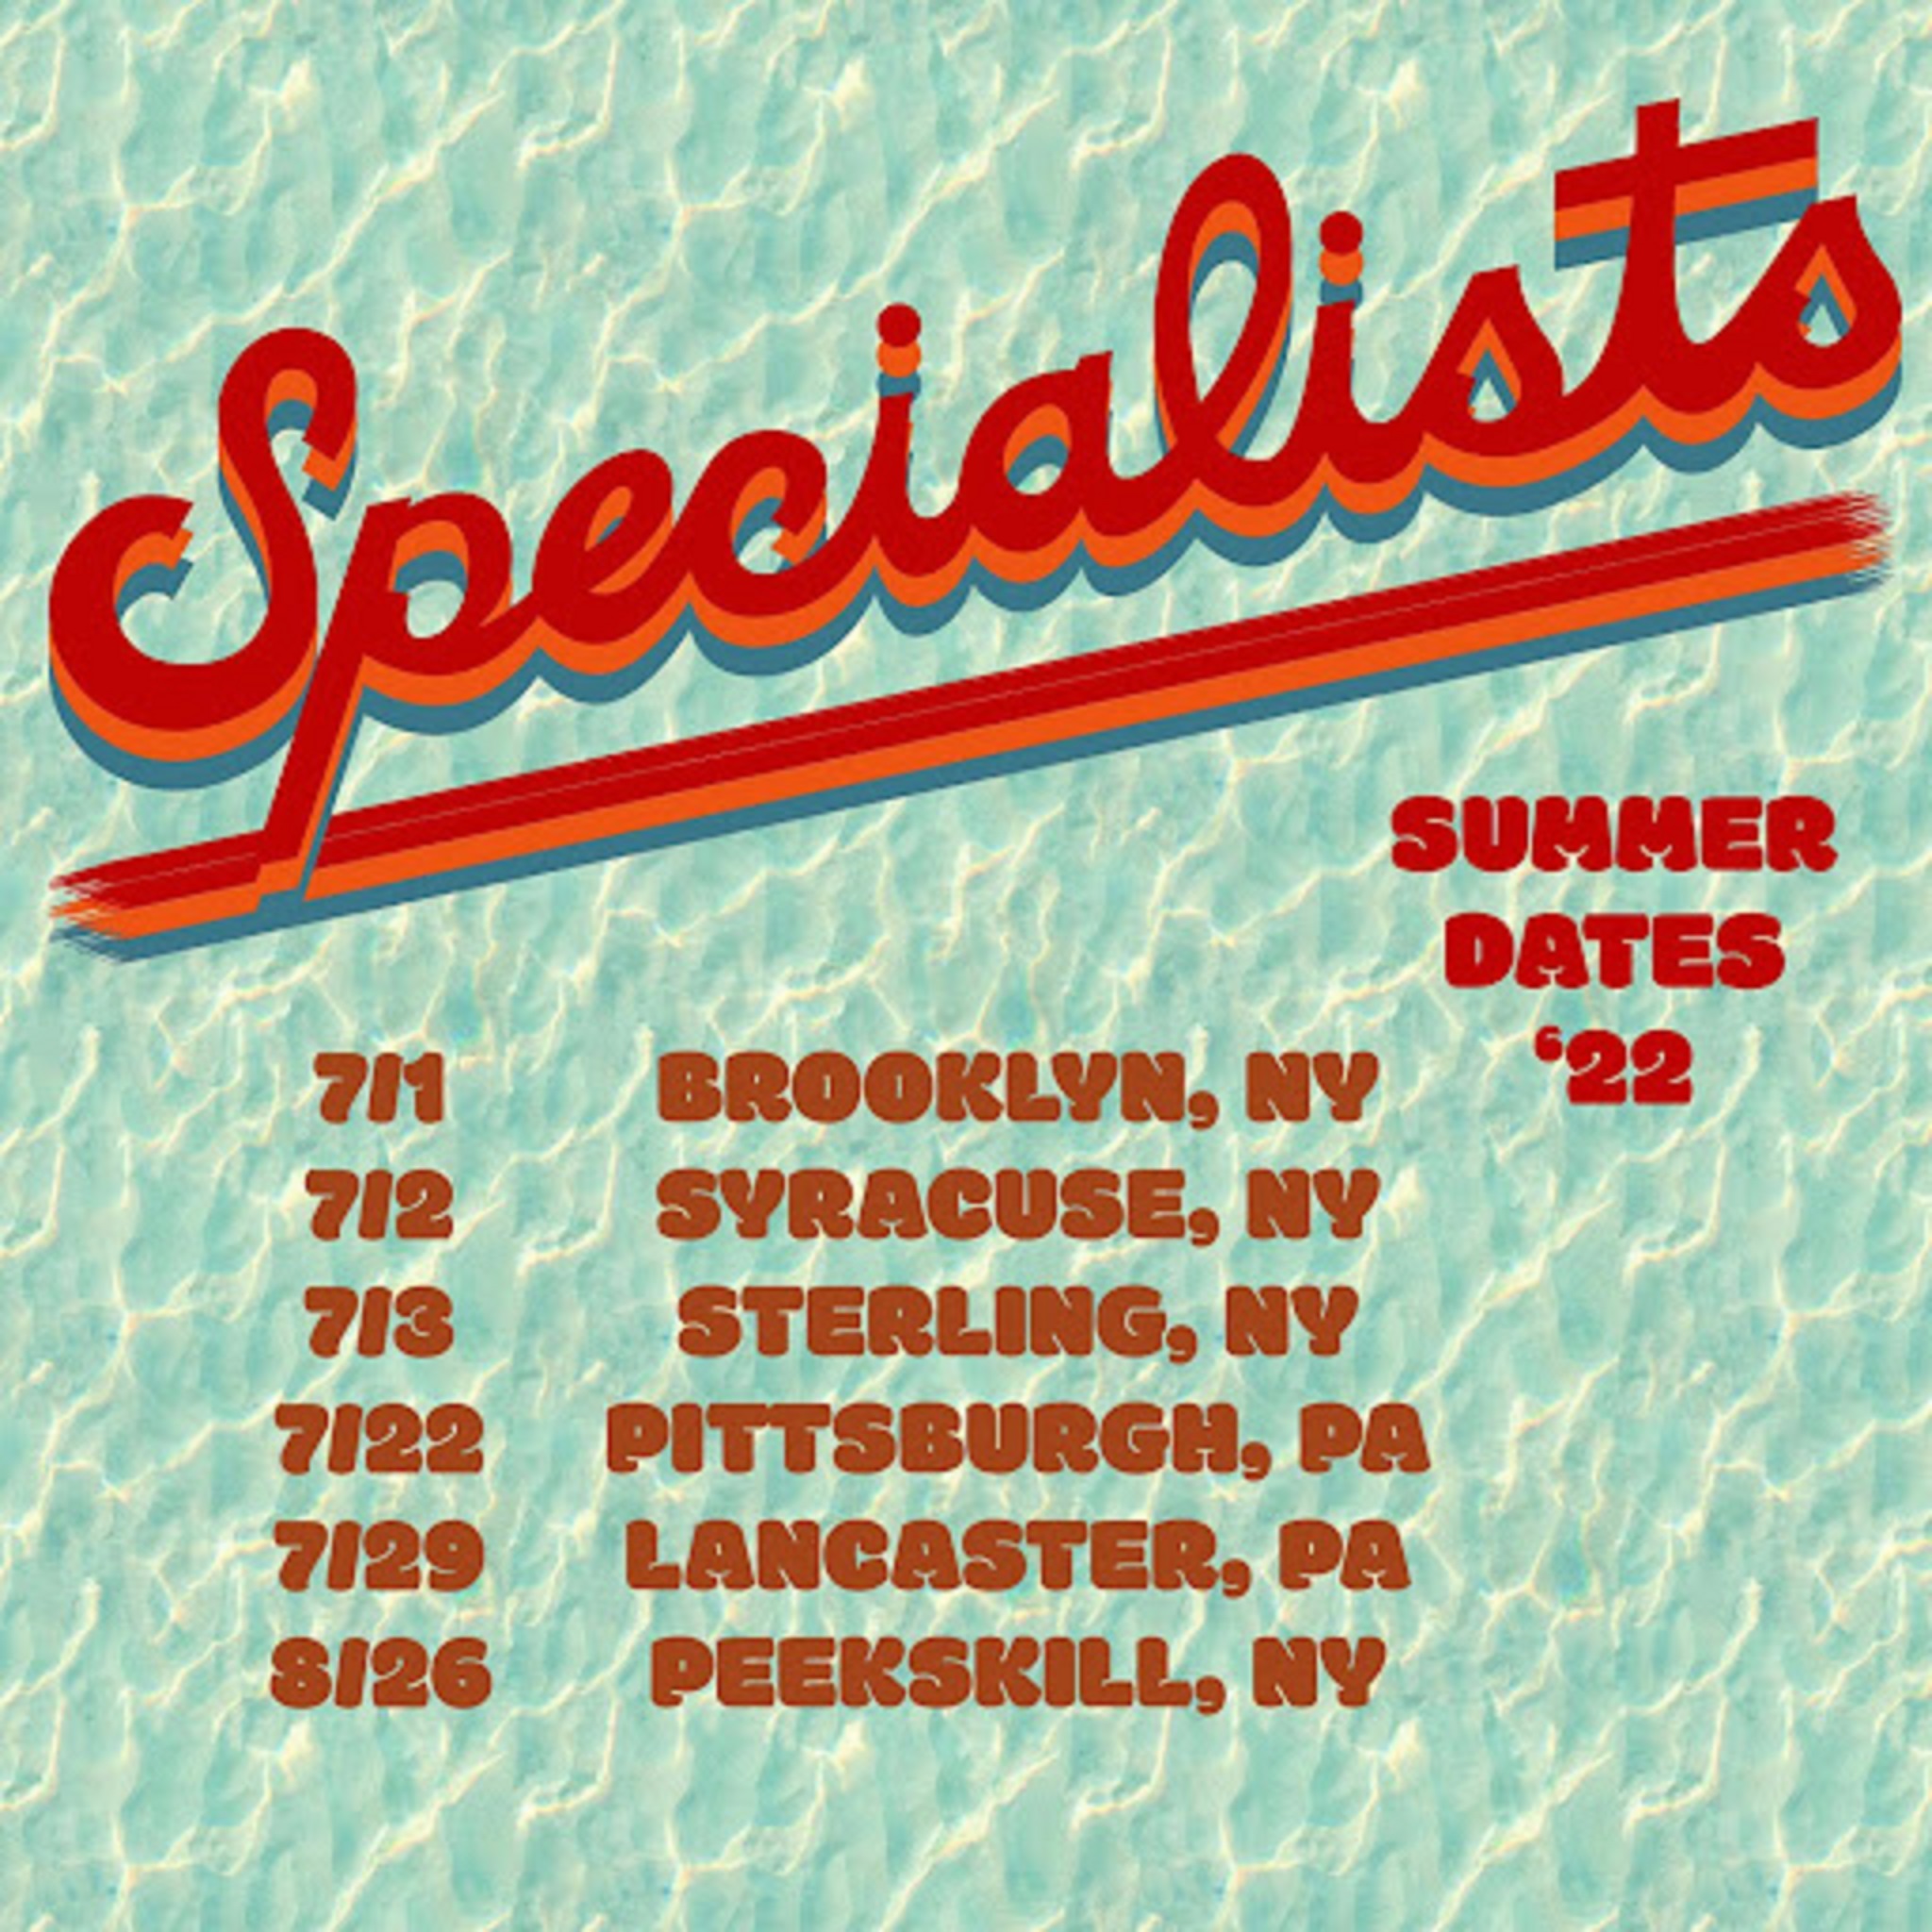 Specialists on tour this summer